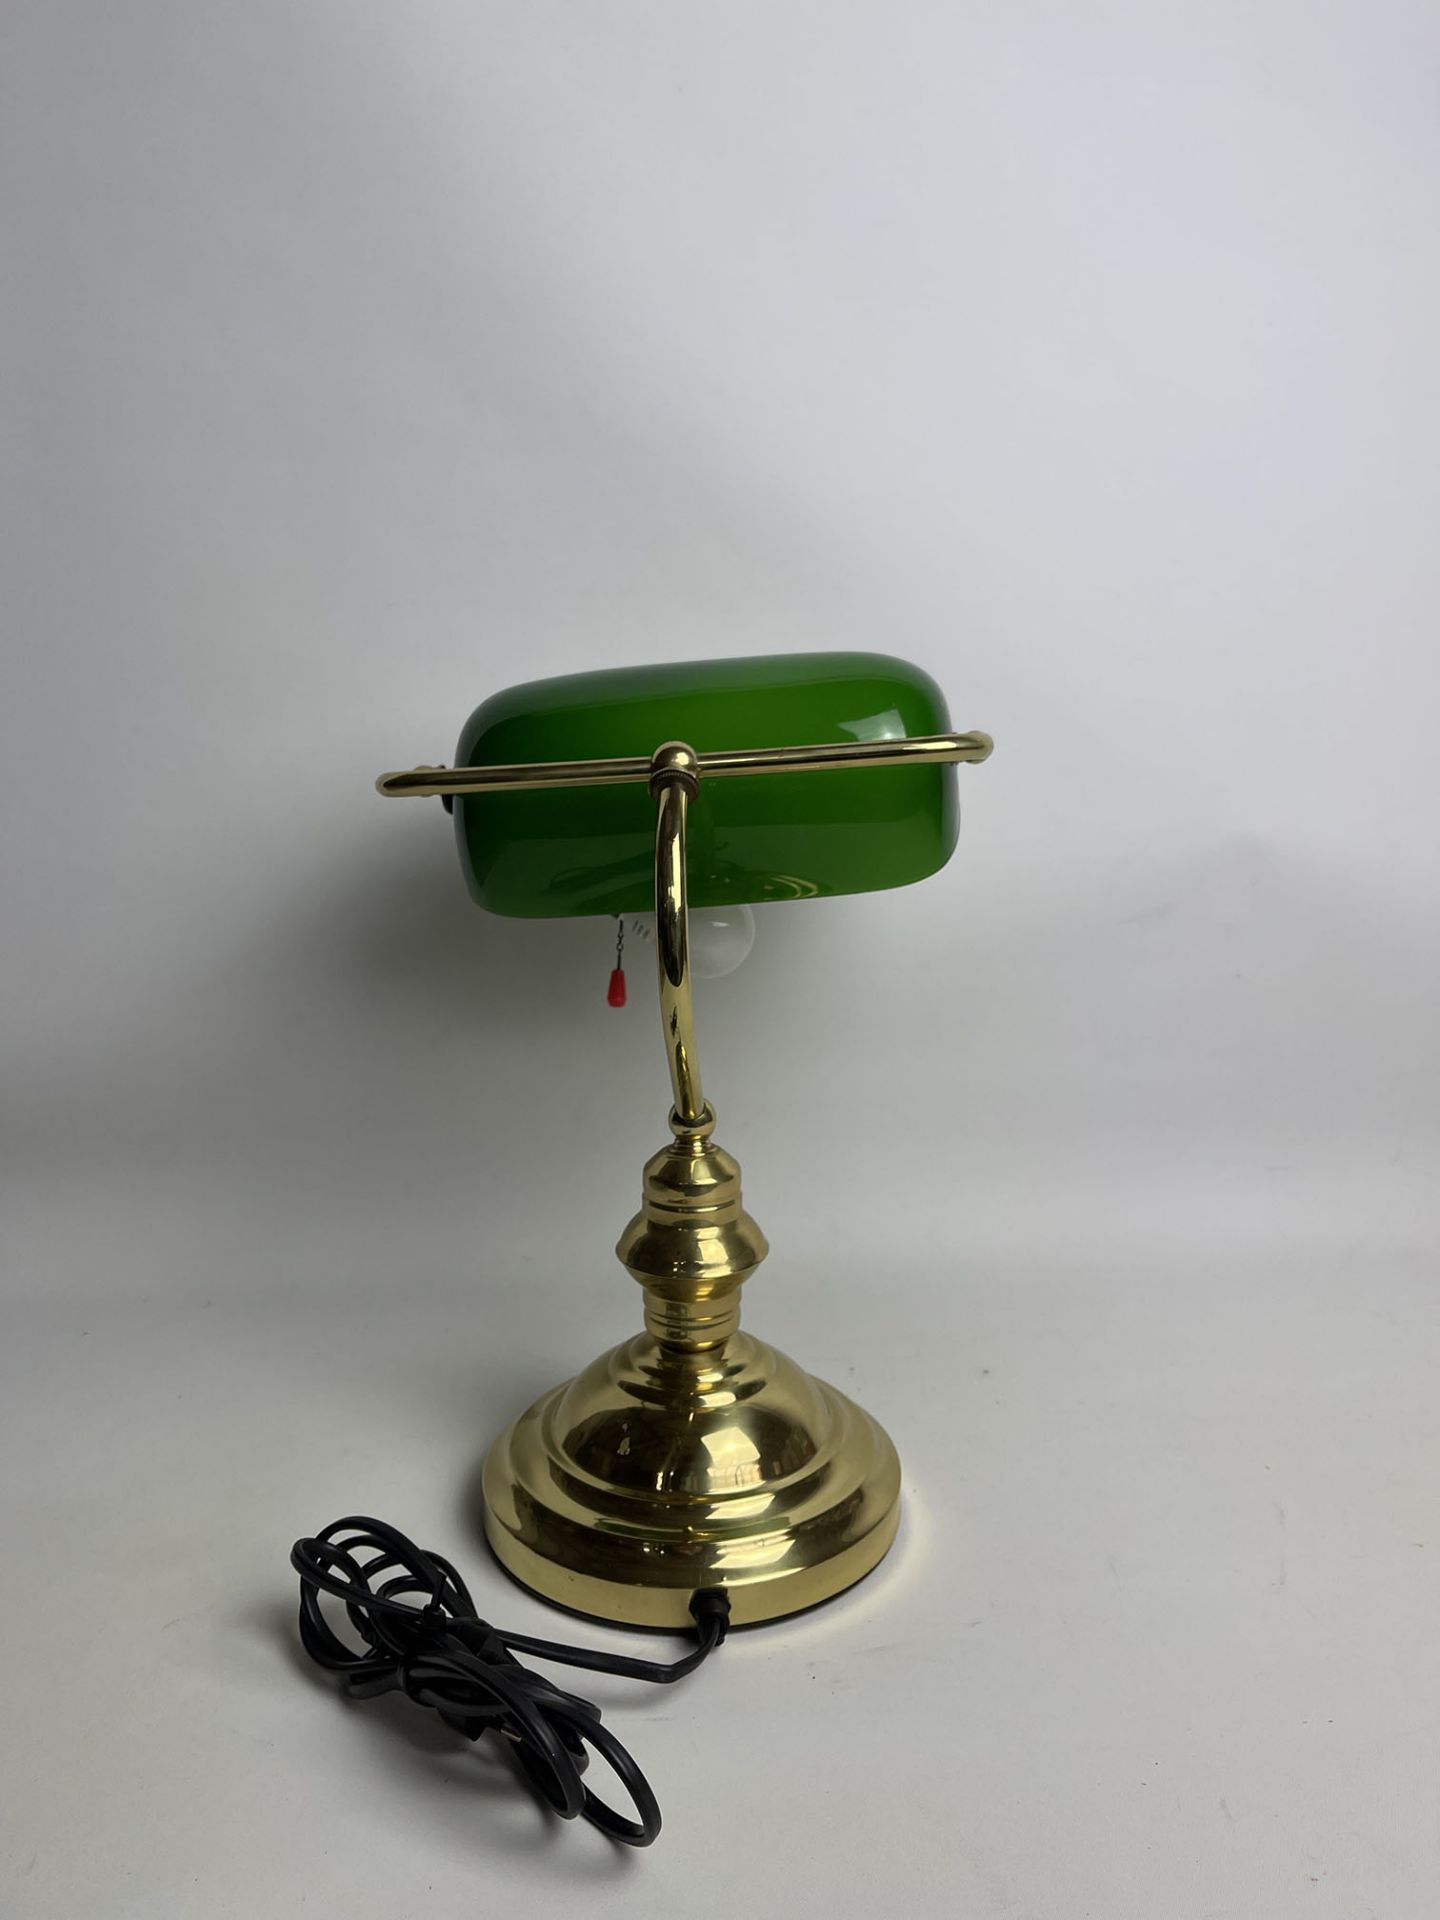 Vintage American Desk Lamp with Green Lamp Shade - Image 5 of 9